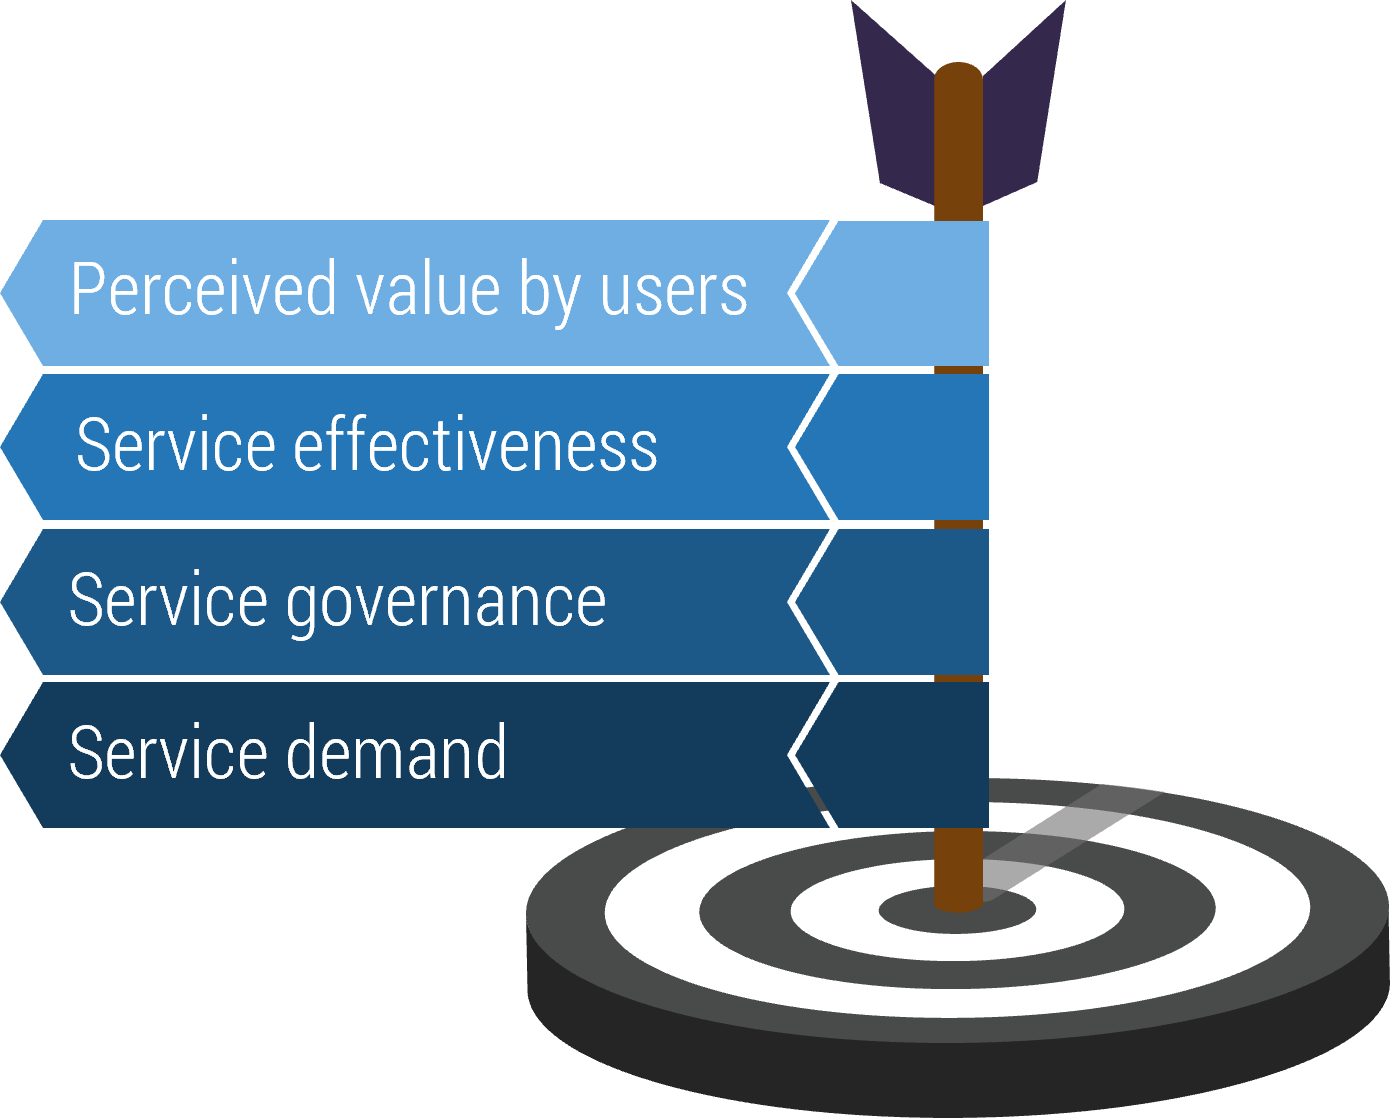 Target with an arrow in the bullseye. The arrow has four flags: 'Perceived value by users', 'Service effectiveness', 'Service governance', and 'Service demand'.